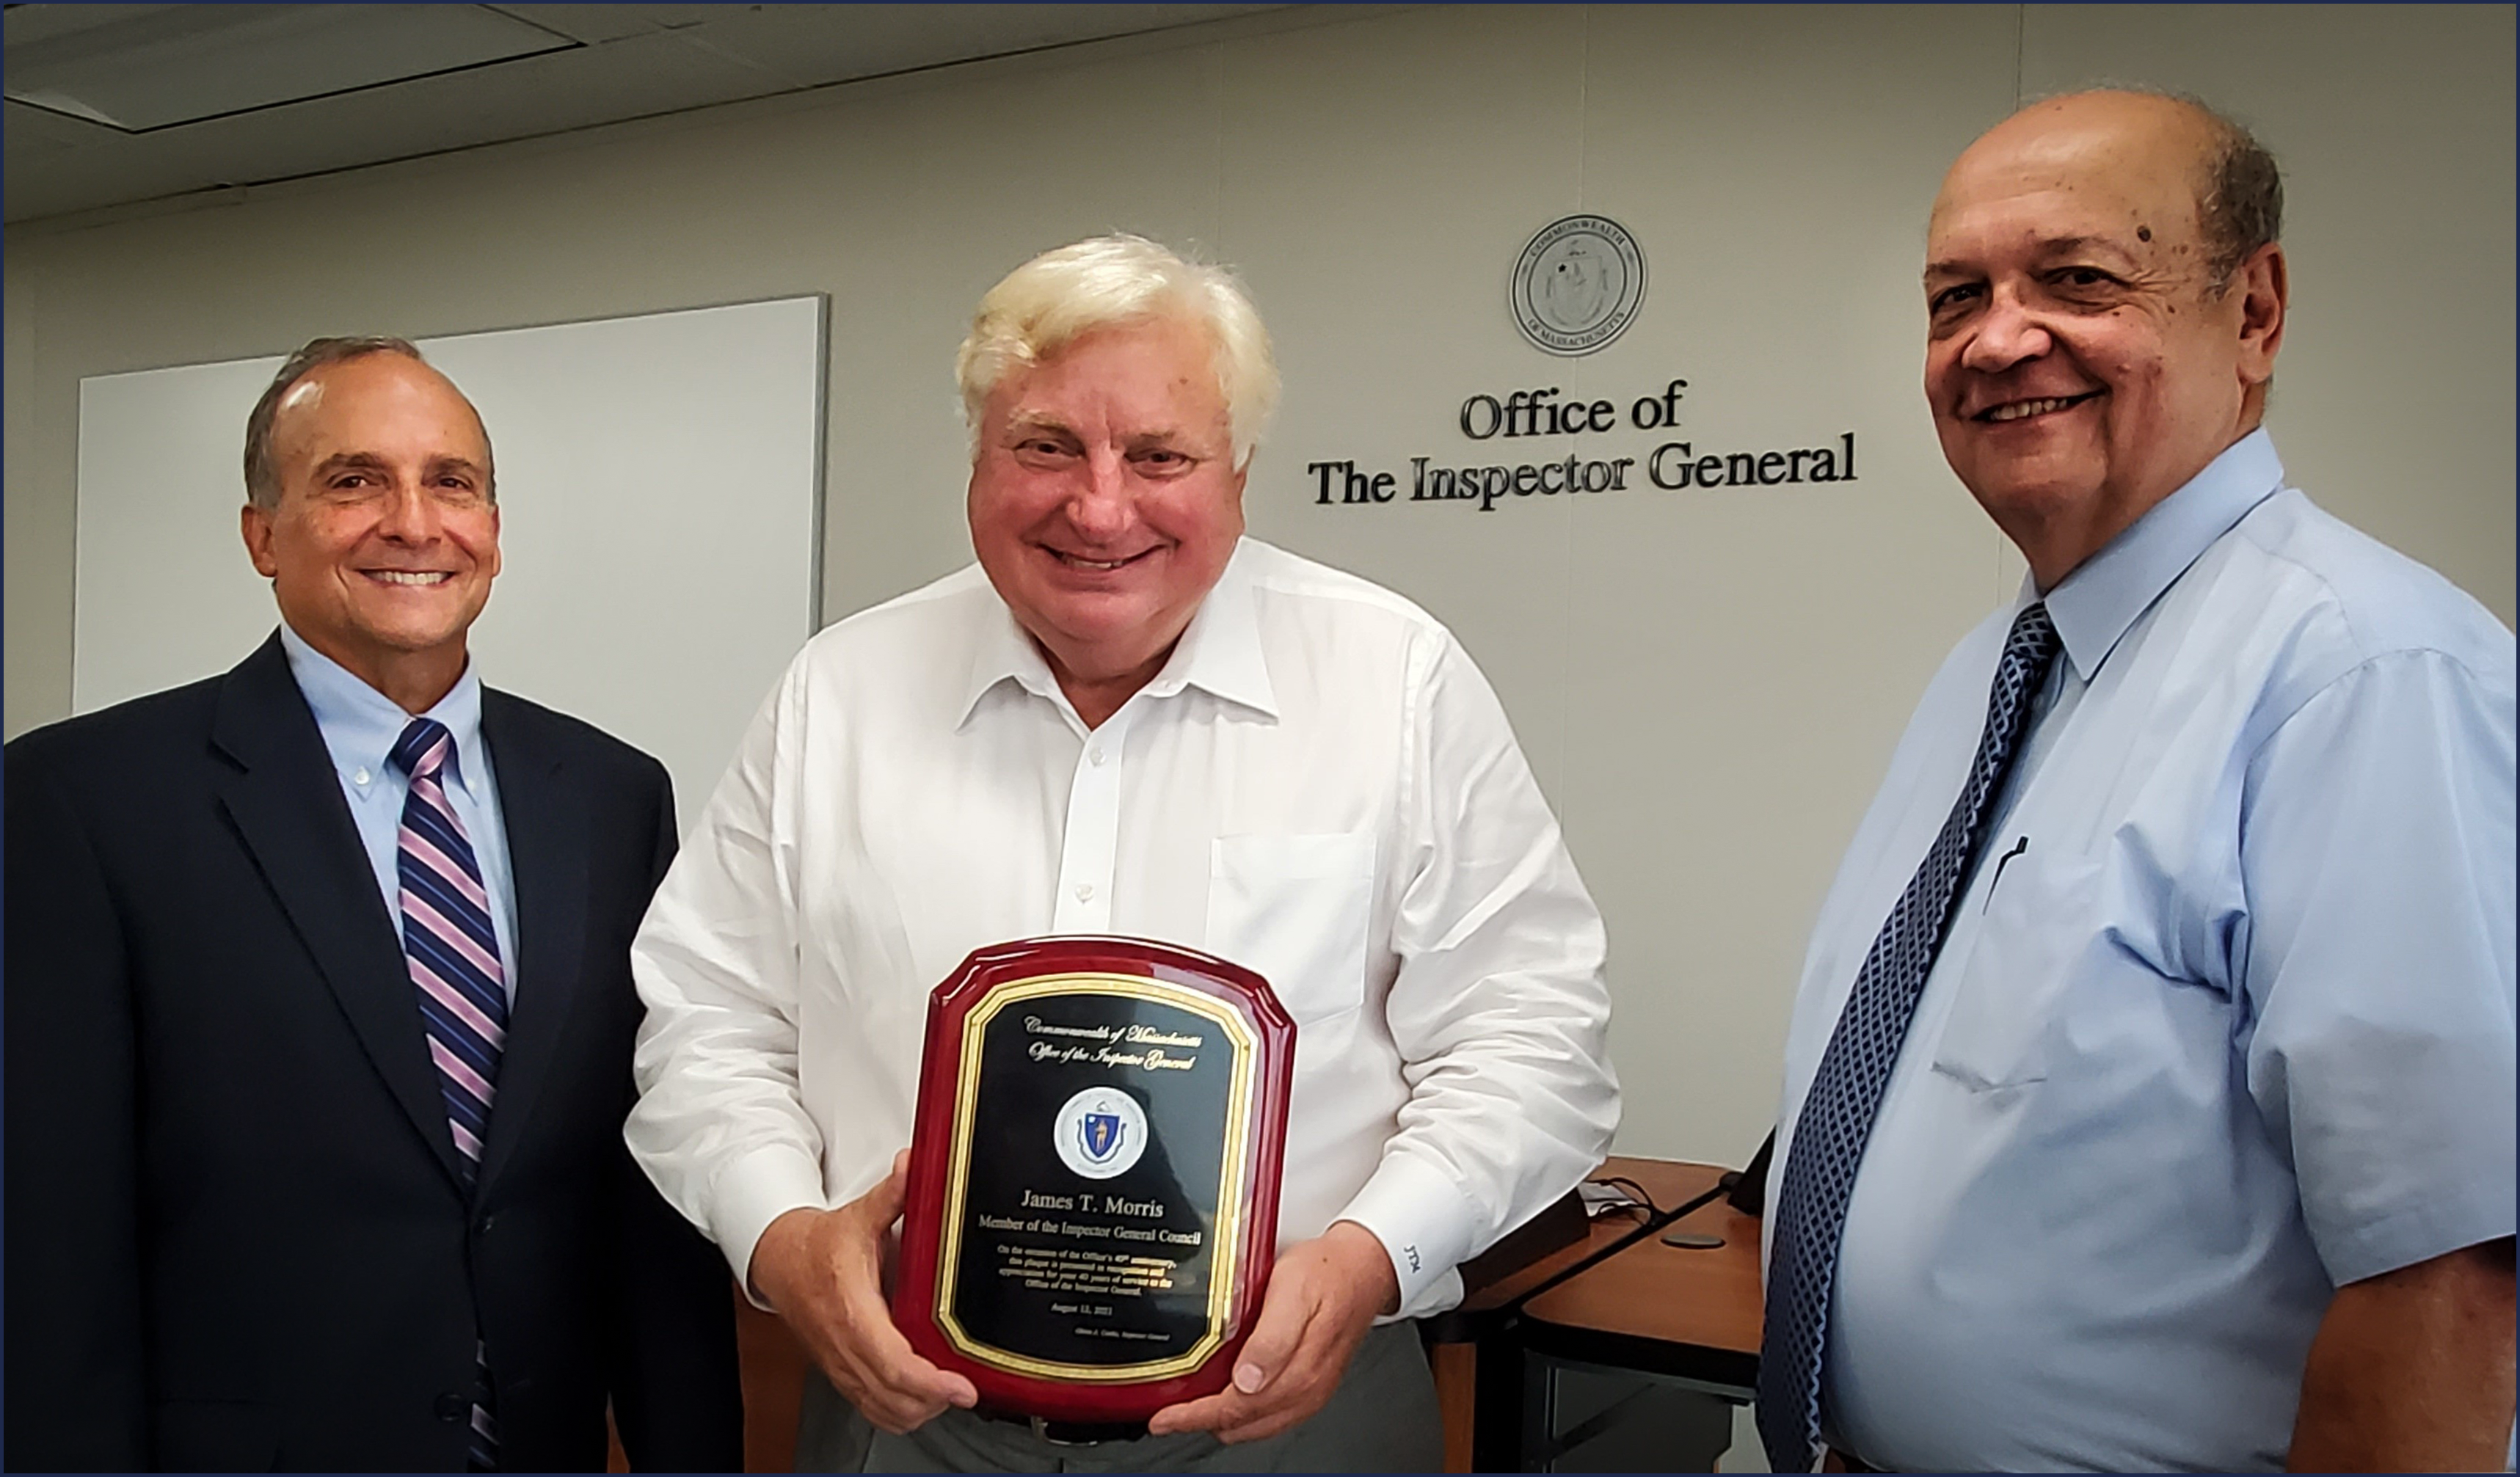 Pictured from left to right: Glenn Cunha, Jim Morris, Michael Caira (Chair of the IG Council)